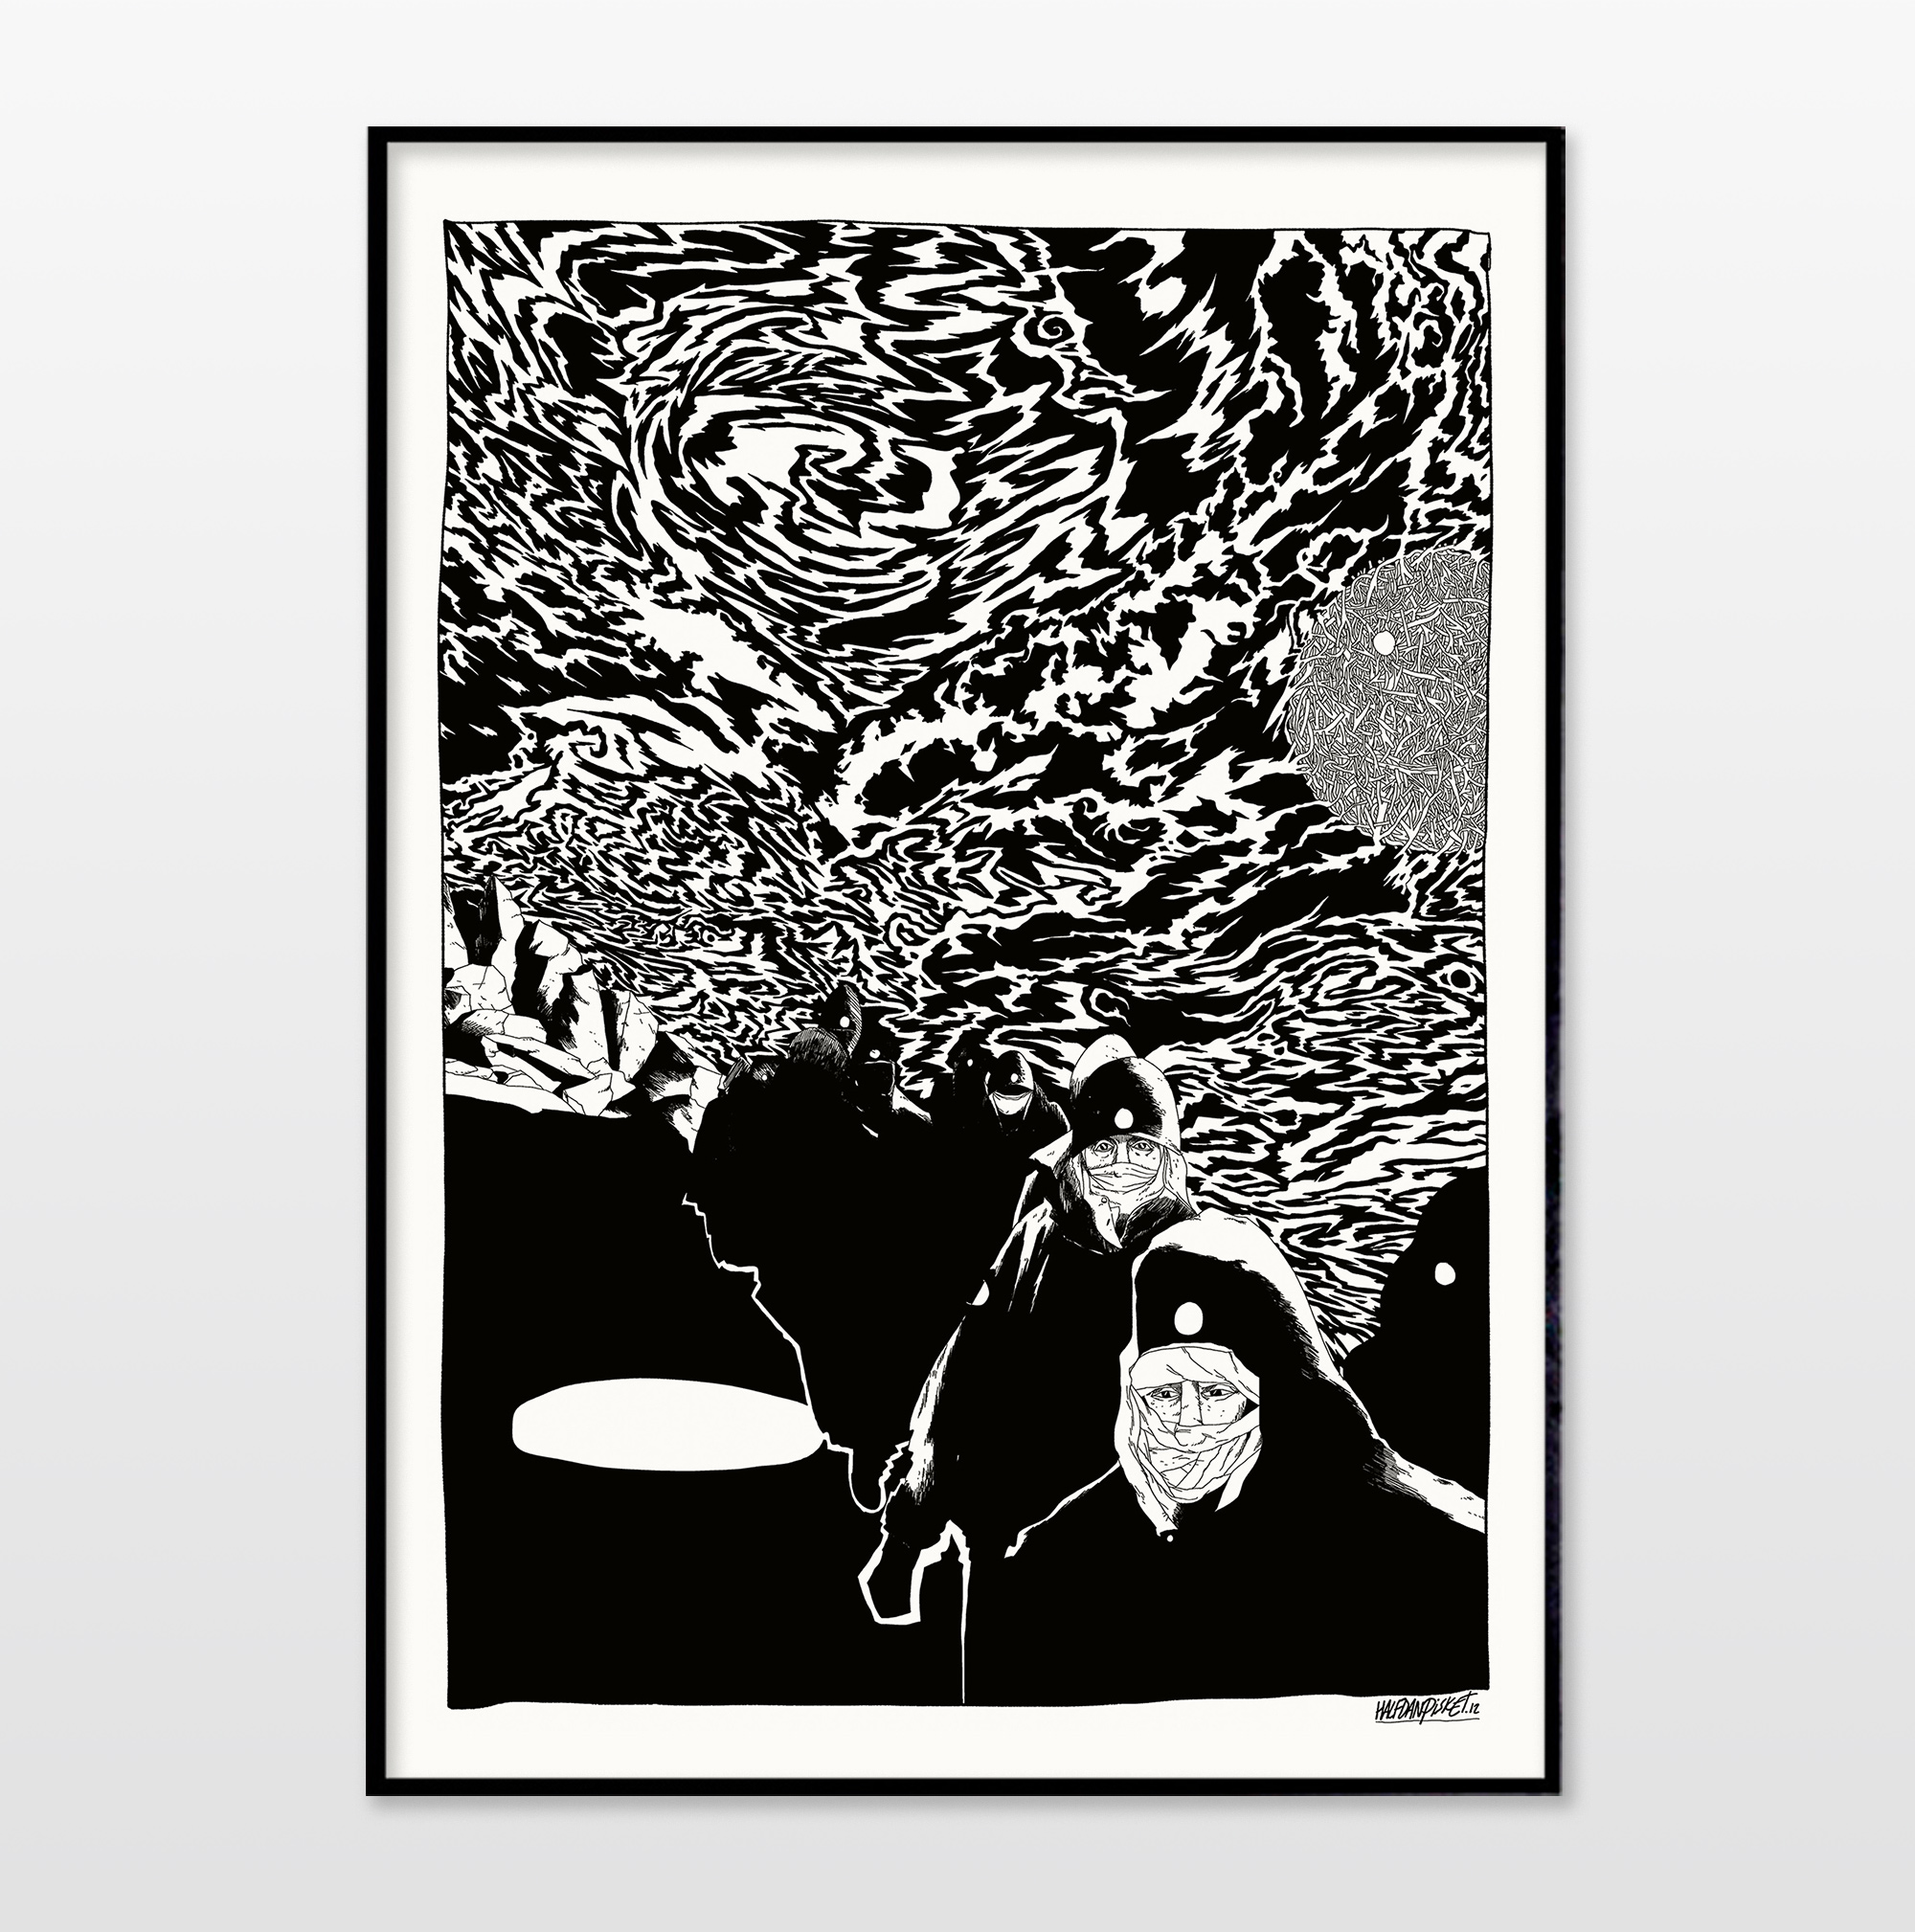 posters-prints, giclee-print, graphical, illustrative, monochrome, portraiture, cartoons, movement, nature, sky, black, white, ink, paper, atmosphere, black-and-white, contemporary-art, danish, decorative, design, faces, modern, modern-art, mountains, nordic, posters, prints, scandinavien, scenery, Buy original high quality art. Paintings, drawings, limited edition prints & posters by talented artists.